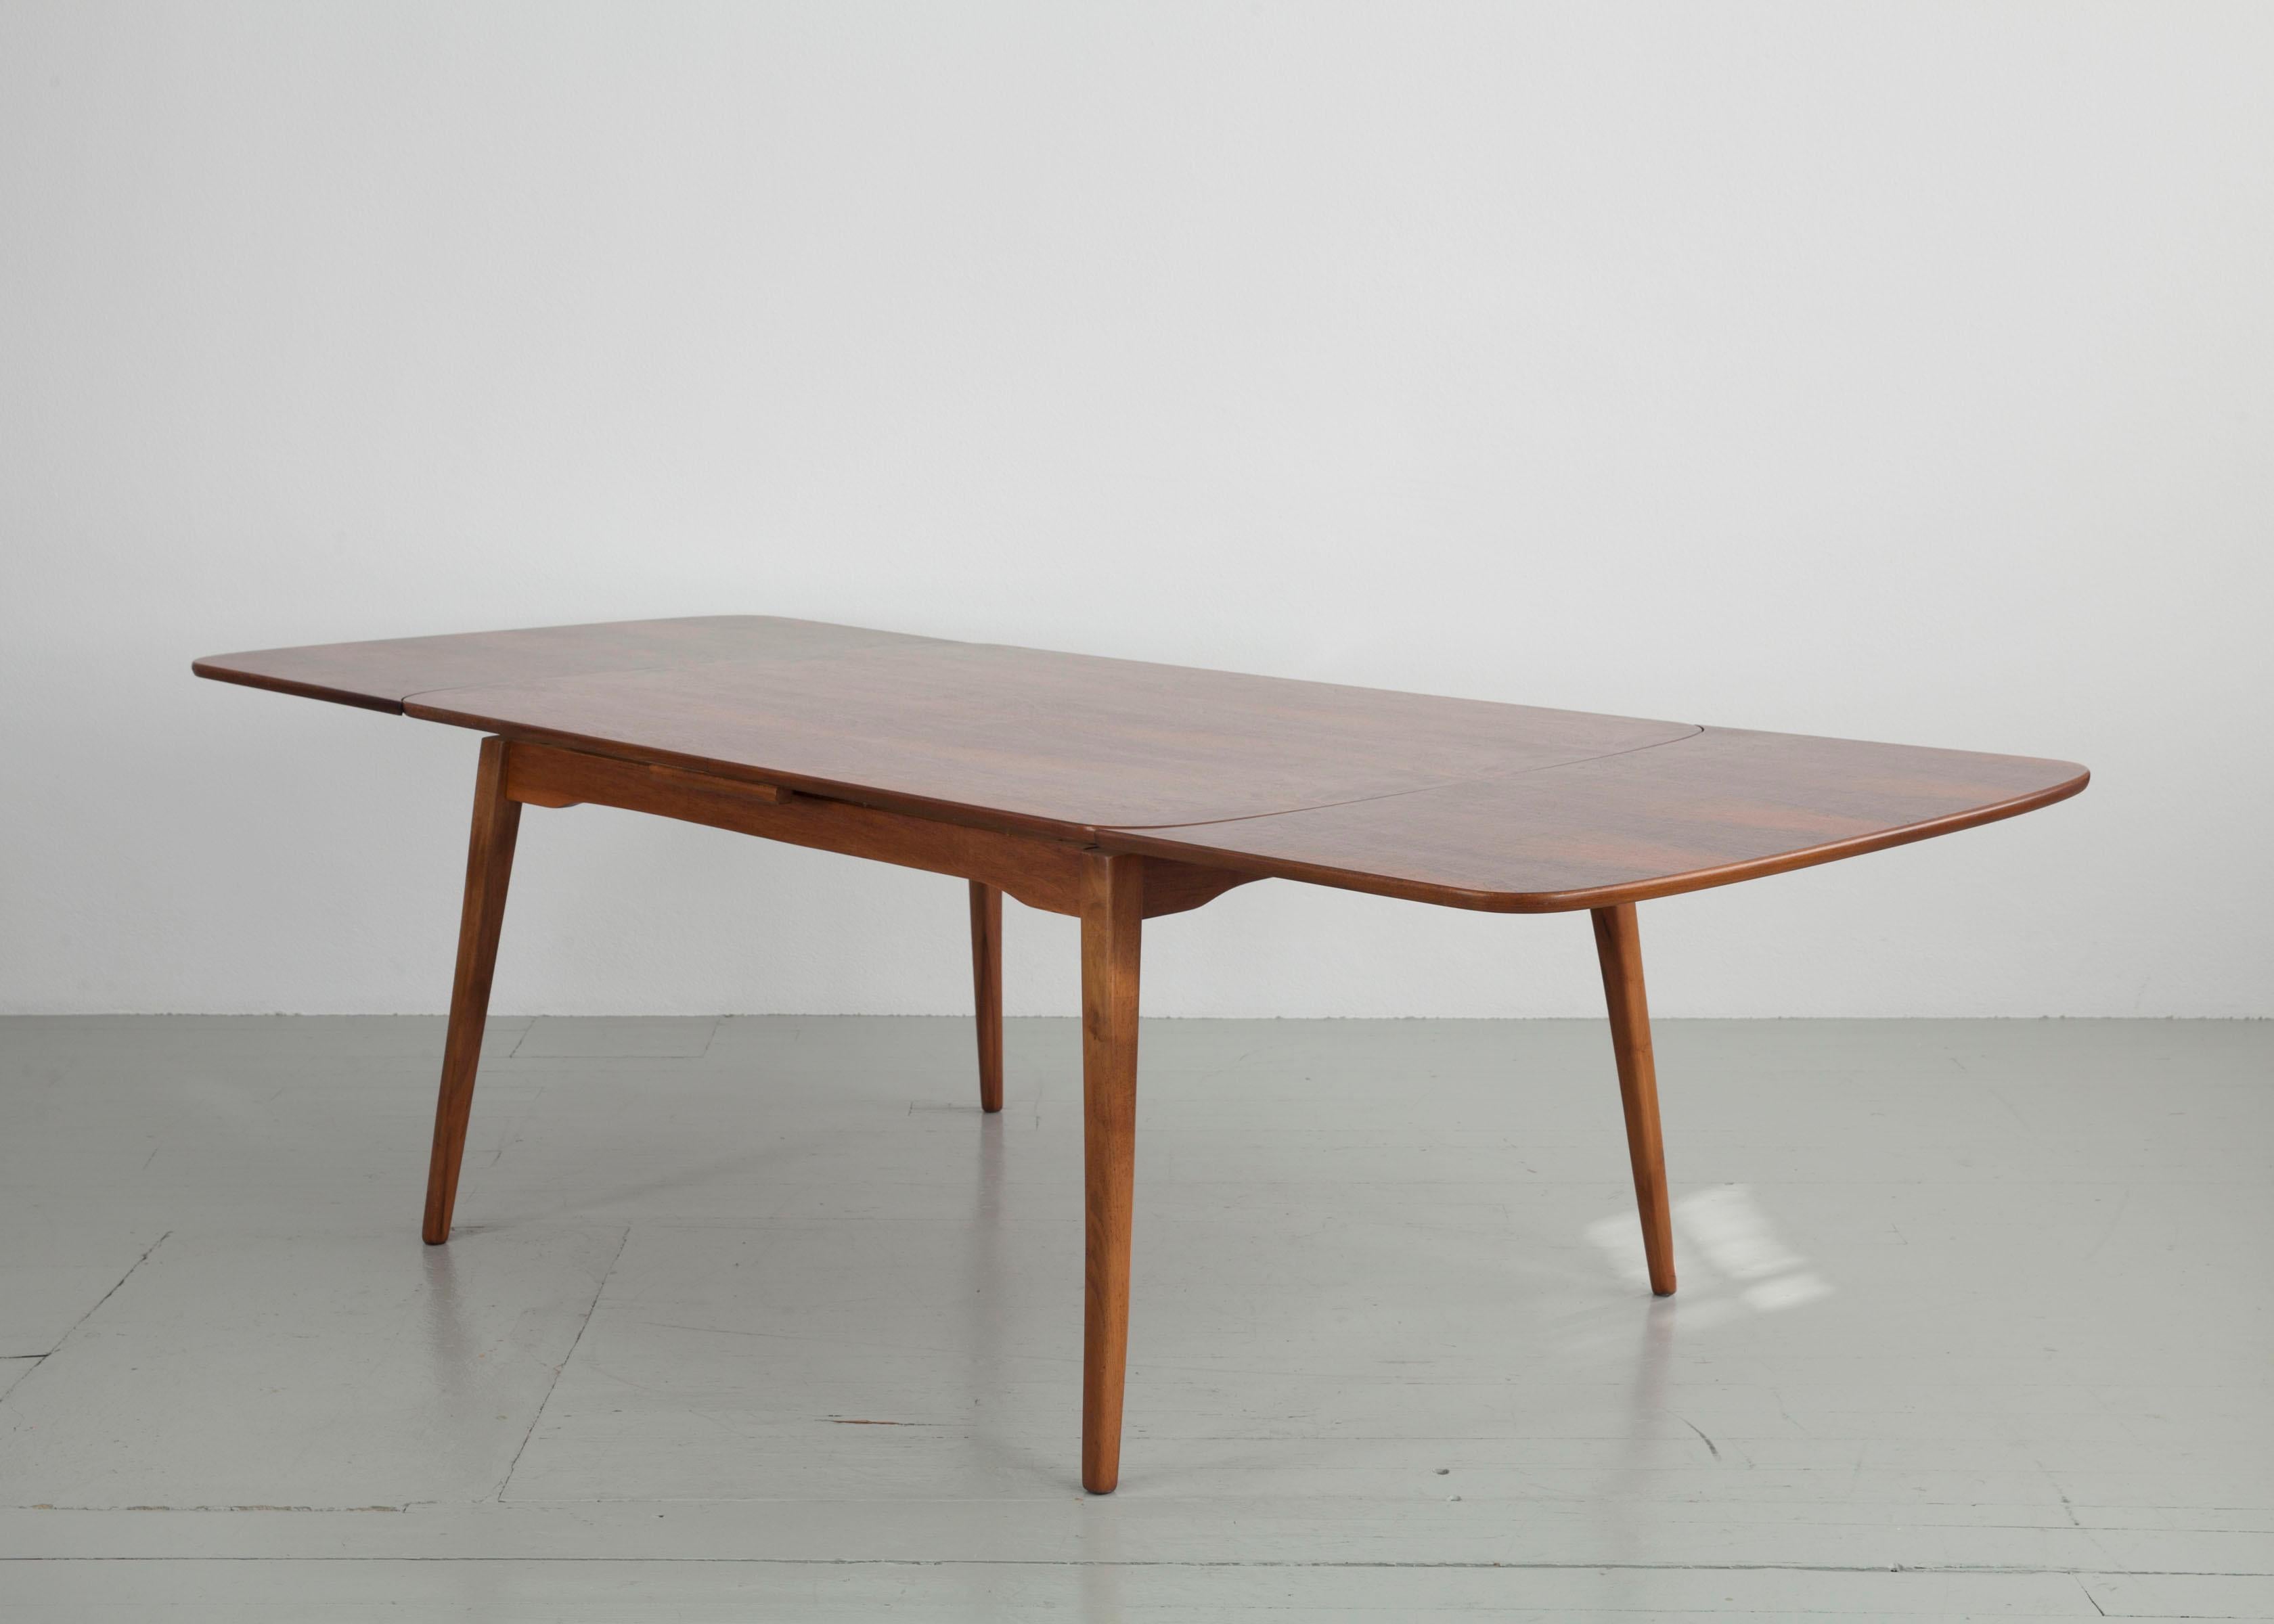 Wood Scandinavian Stained Beechwood Extendable Table, 1960s For Sale